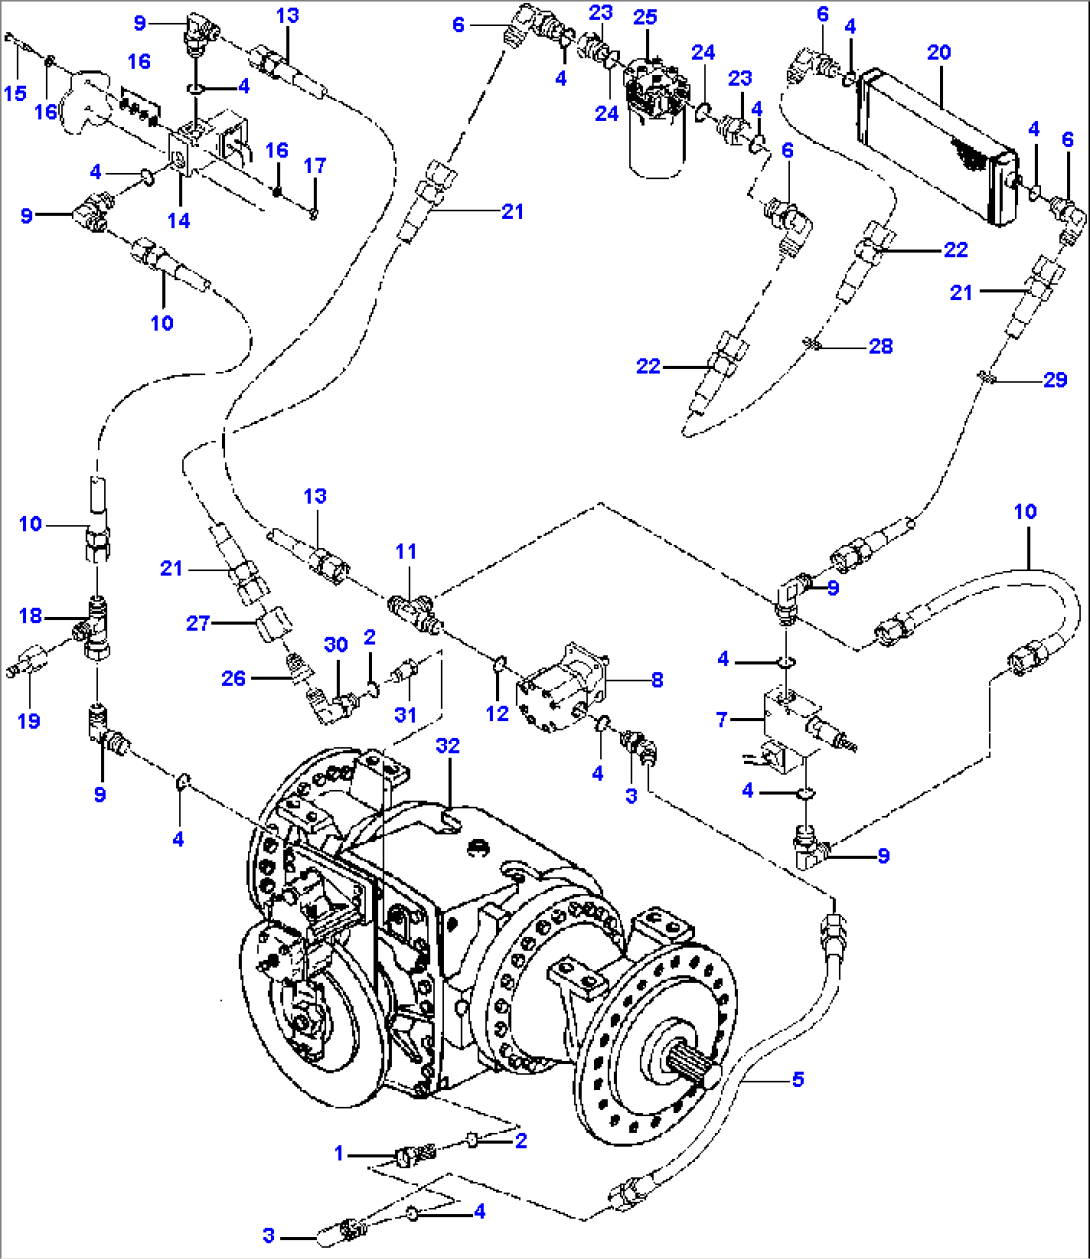 FIG. H5110-01A25 LOCK/UNLOCK DIFFERENTIAL HYDRAULIC SYSTEM - S/N 202724 AND UP